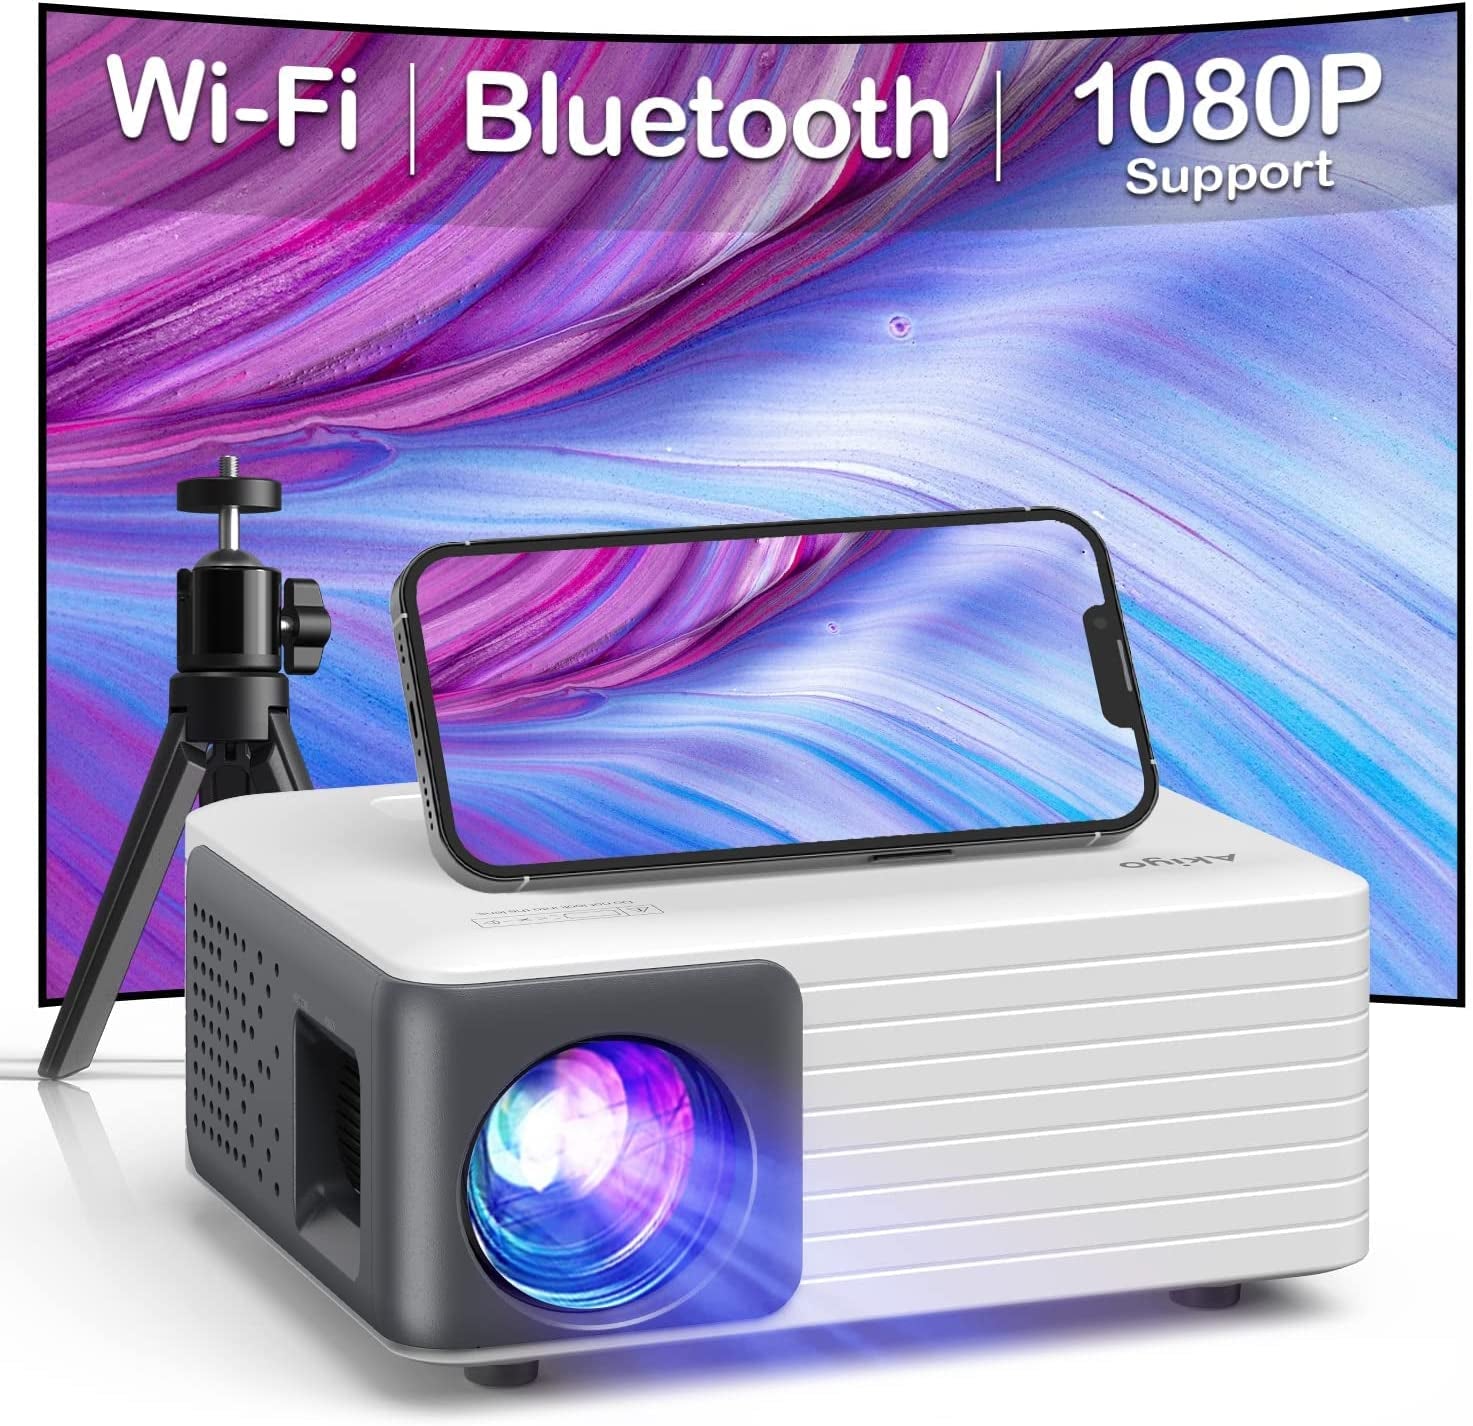 Mini Projector with Wifi and Bluetooth, 1080P Supported Iphone Projector with Projector Stand, Portable Movie Projector for Home Theater/Outdoor, Compatible with Ios/Android/Laptop/Tv Stick/Hdmi/Ps5